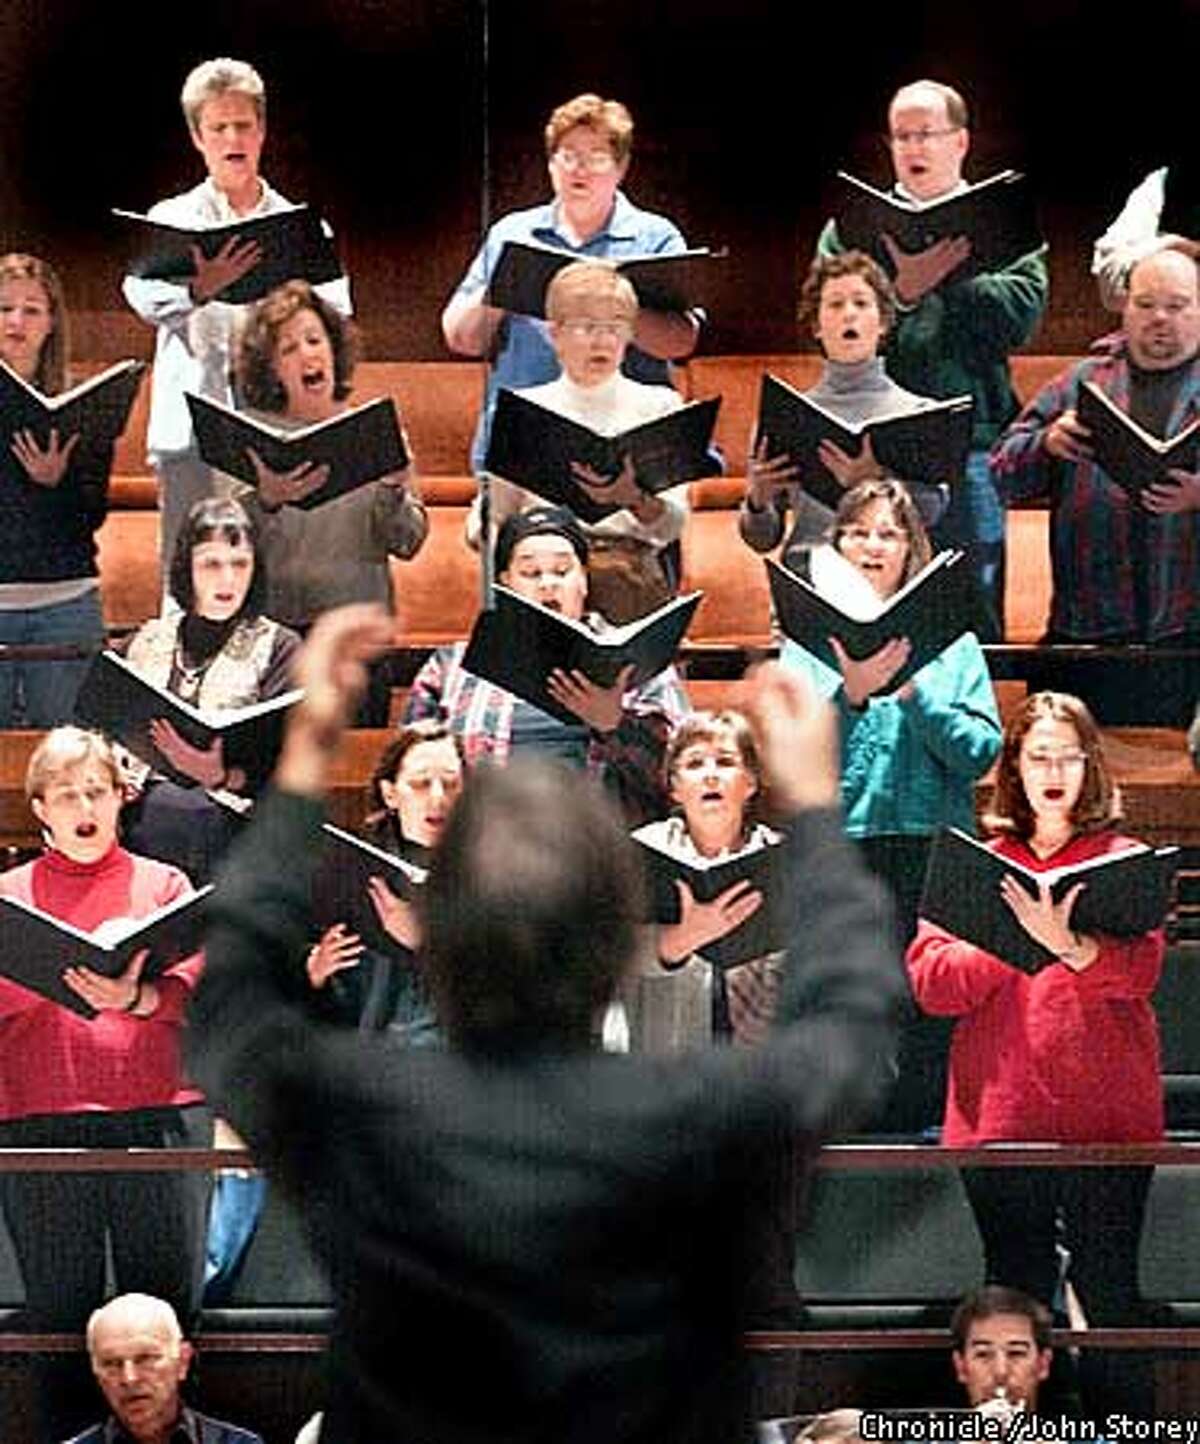 A rehearsal for the SF Symphony and chorus that will be touring Carnegie Hall. Photo by John Storey.